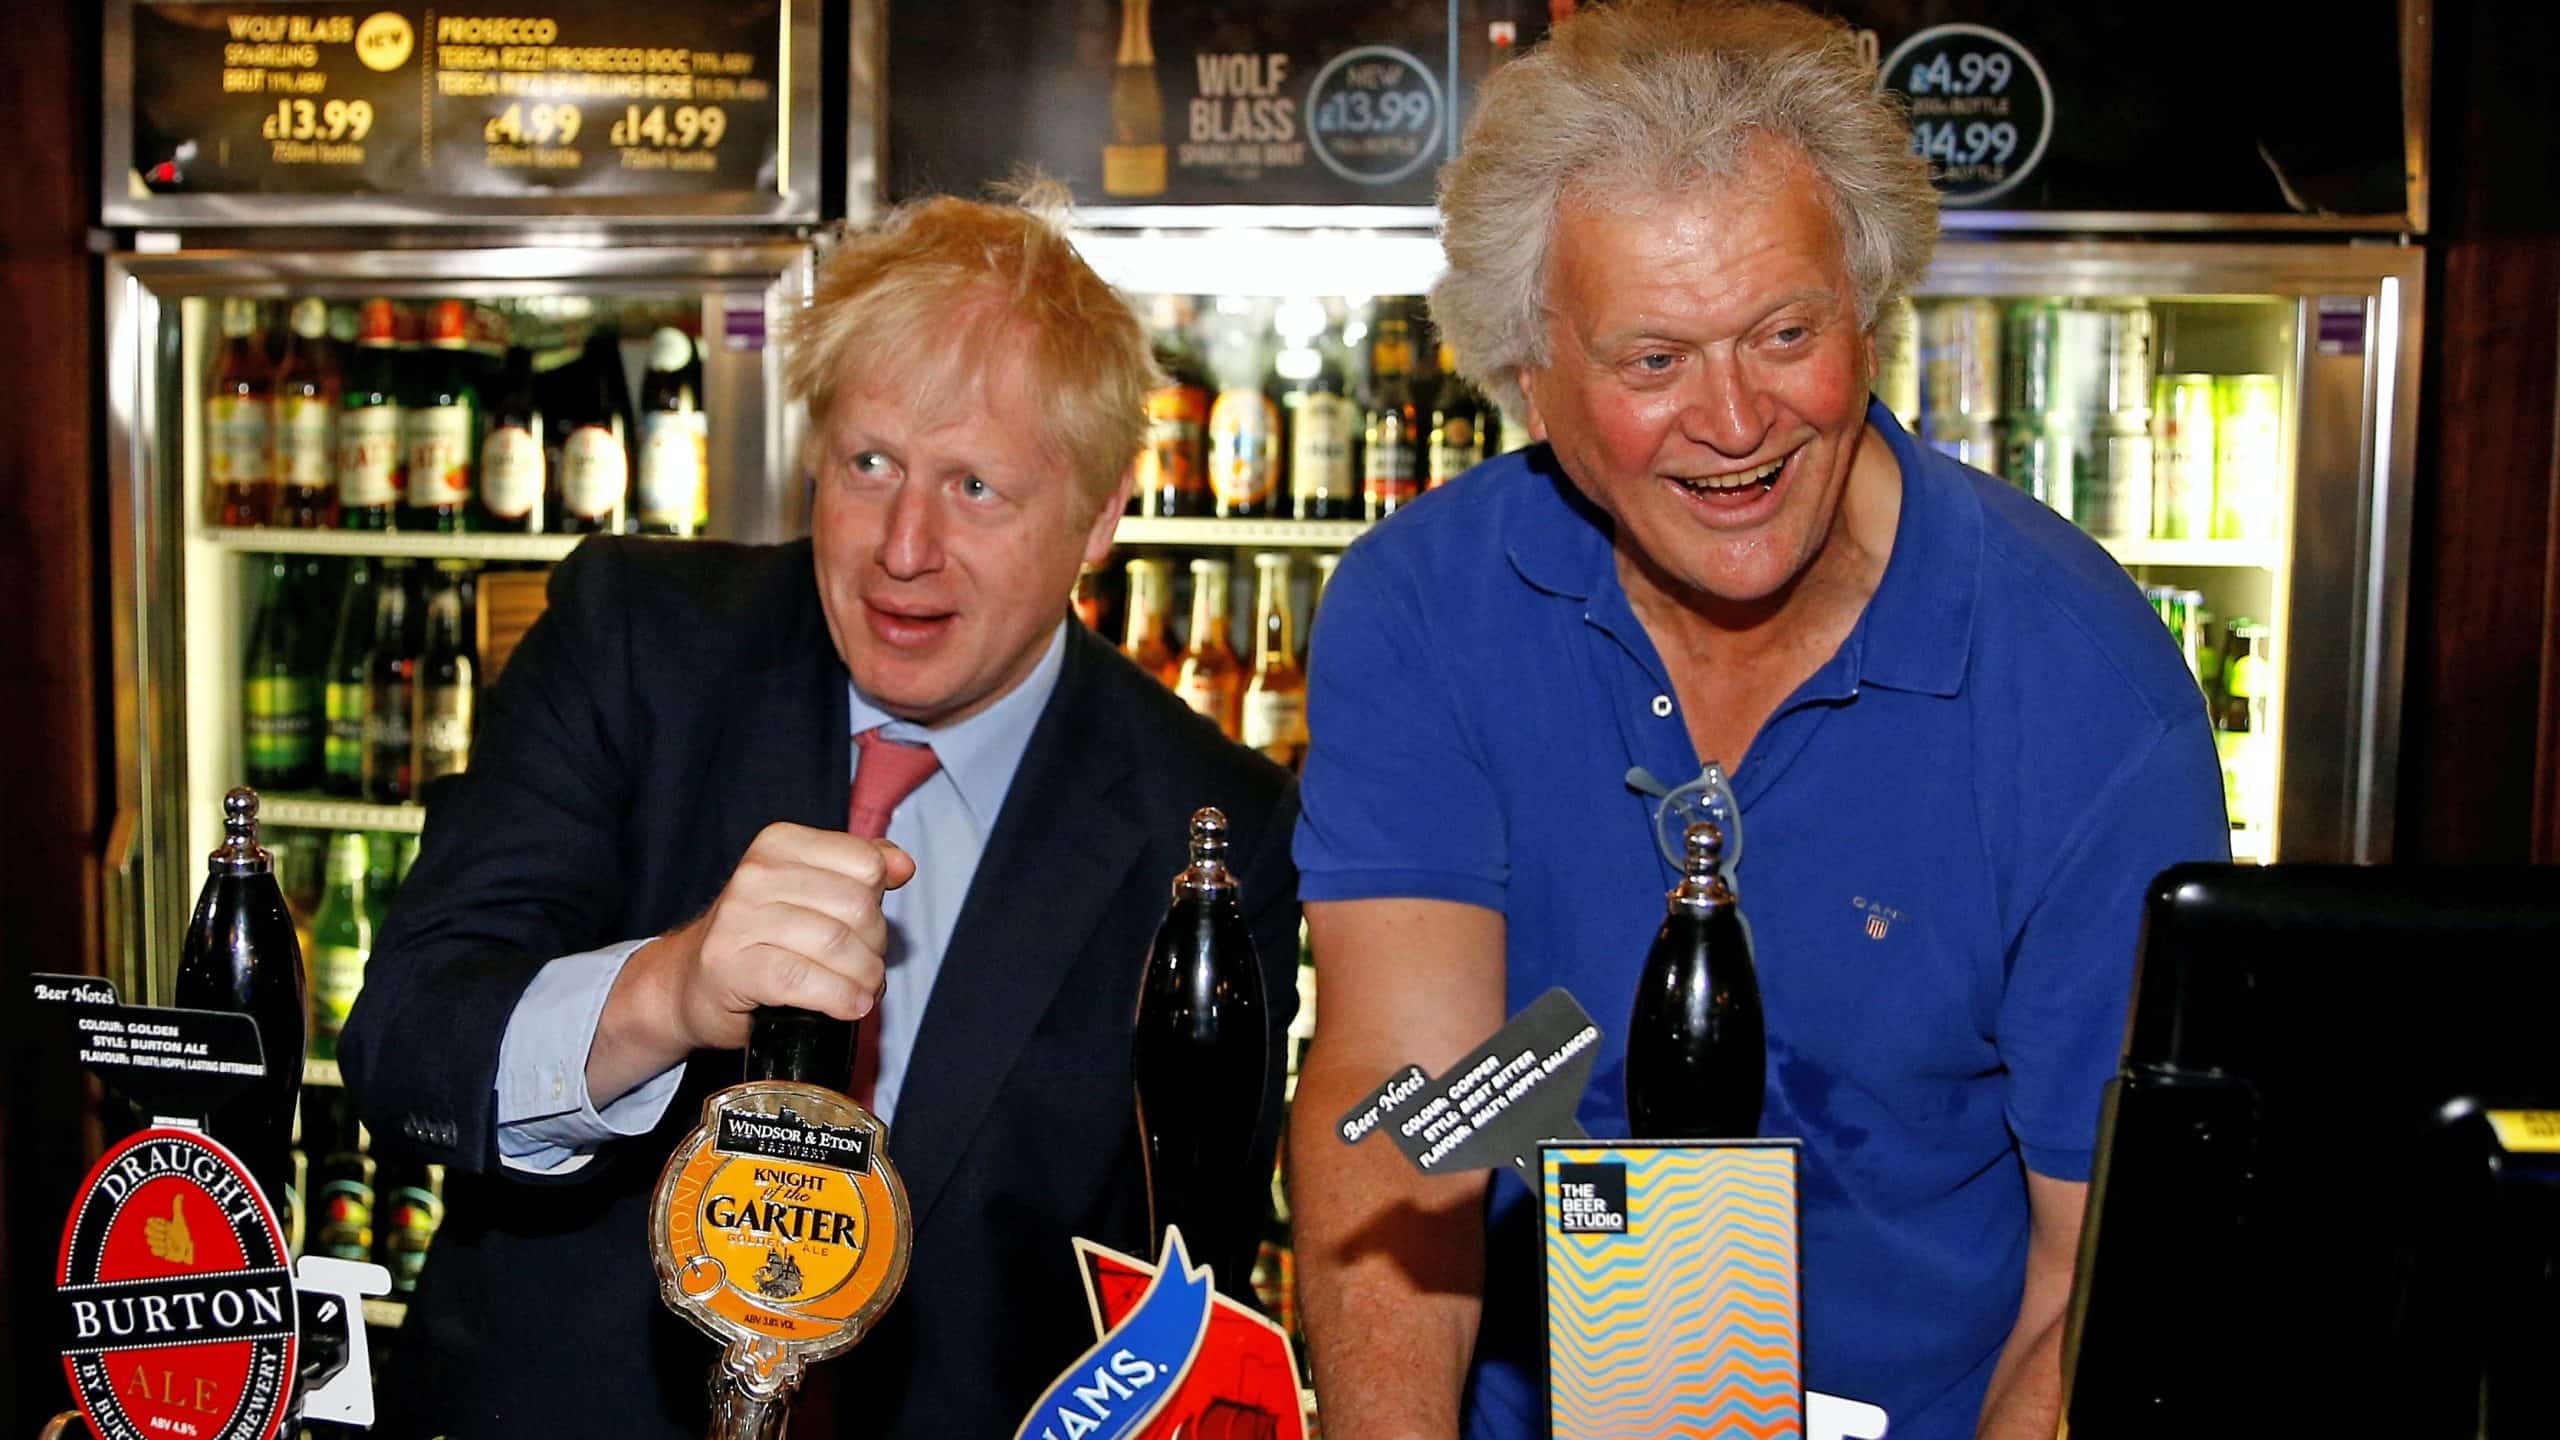 Wetherspoon warns of annual loss after sales plunge